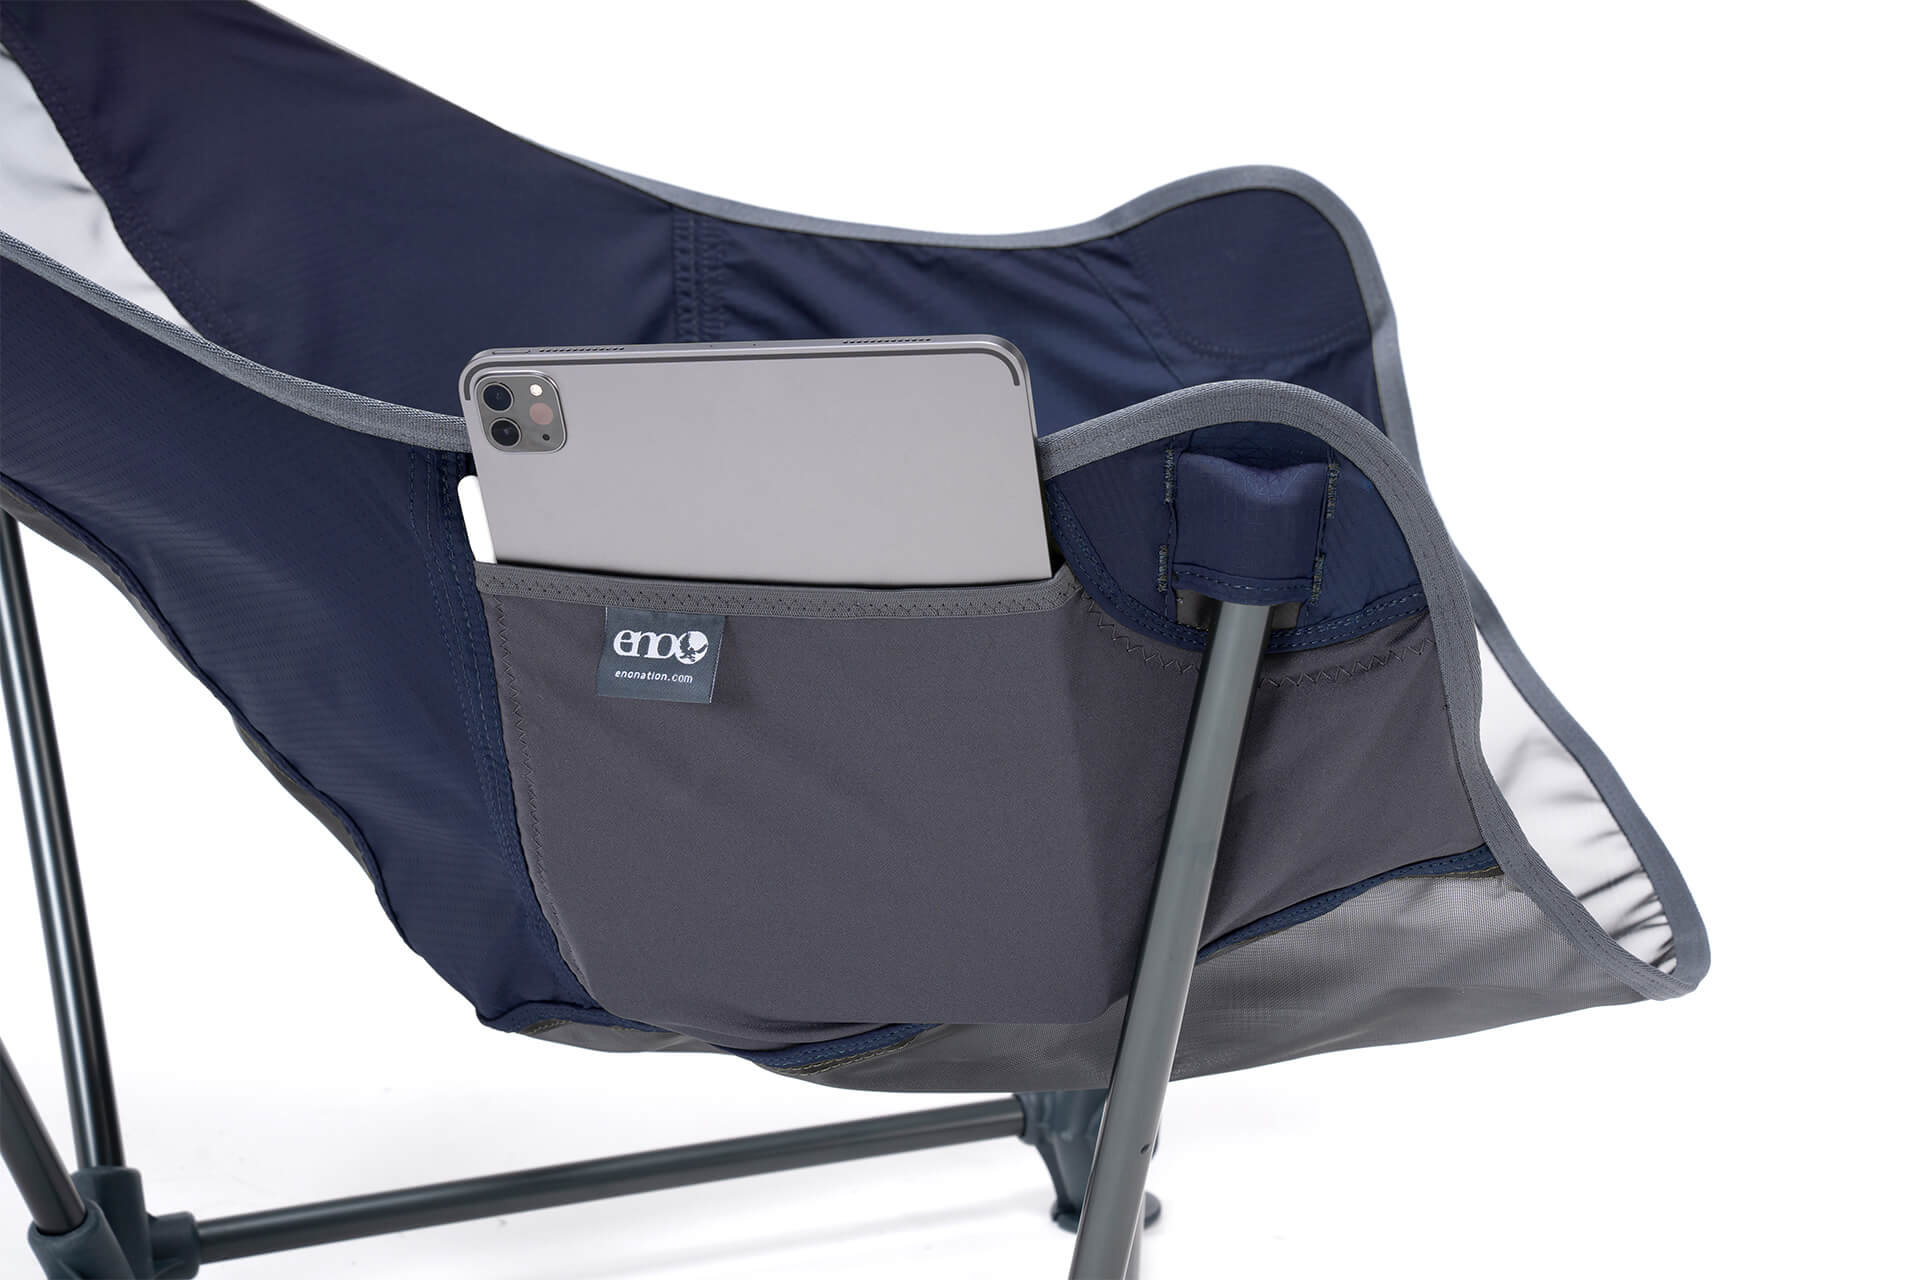 Eagles Nest Outfitters, Inc. Chairs & Blankets Lounger™ SL Chair